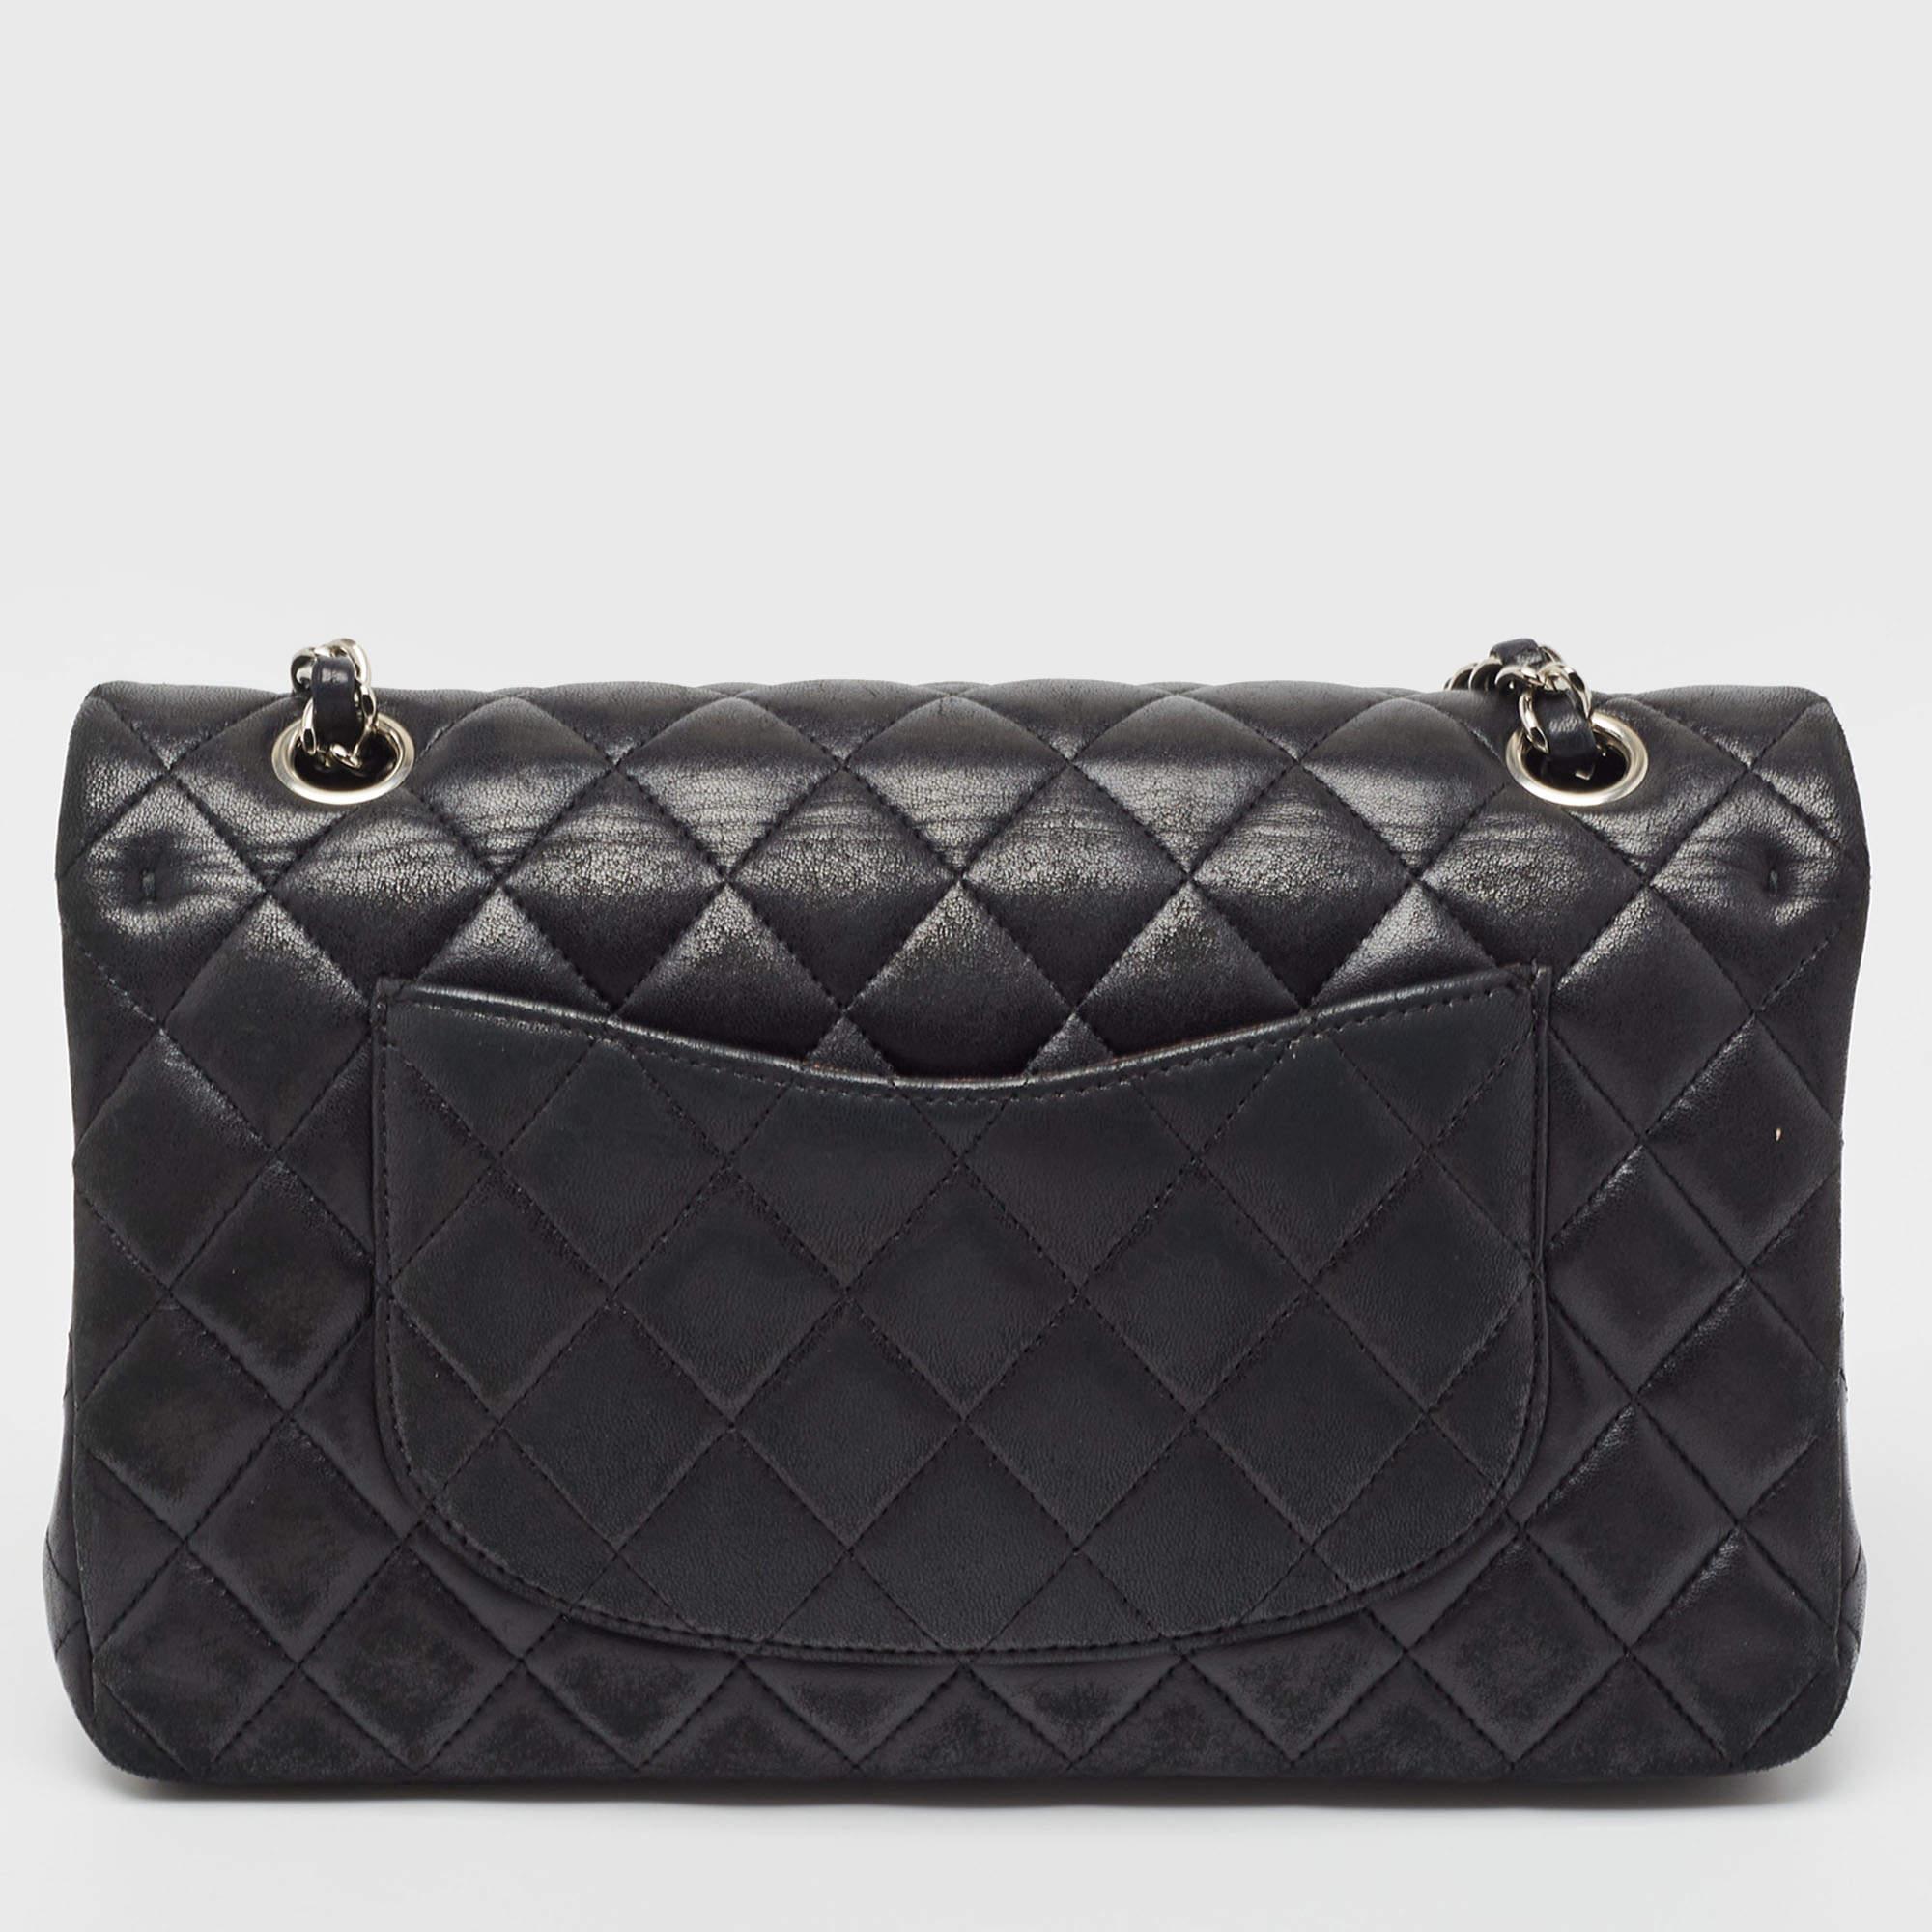 Chanel's luxurious Double Flap bag is a must-have in a well-curated wardrobe! This stunning bag has a masterfully crafted leather exterior with silver-tone hardware and the iconic CC logo to secure the flap.

